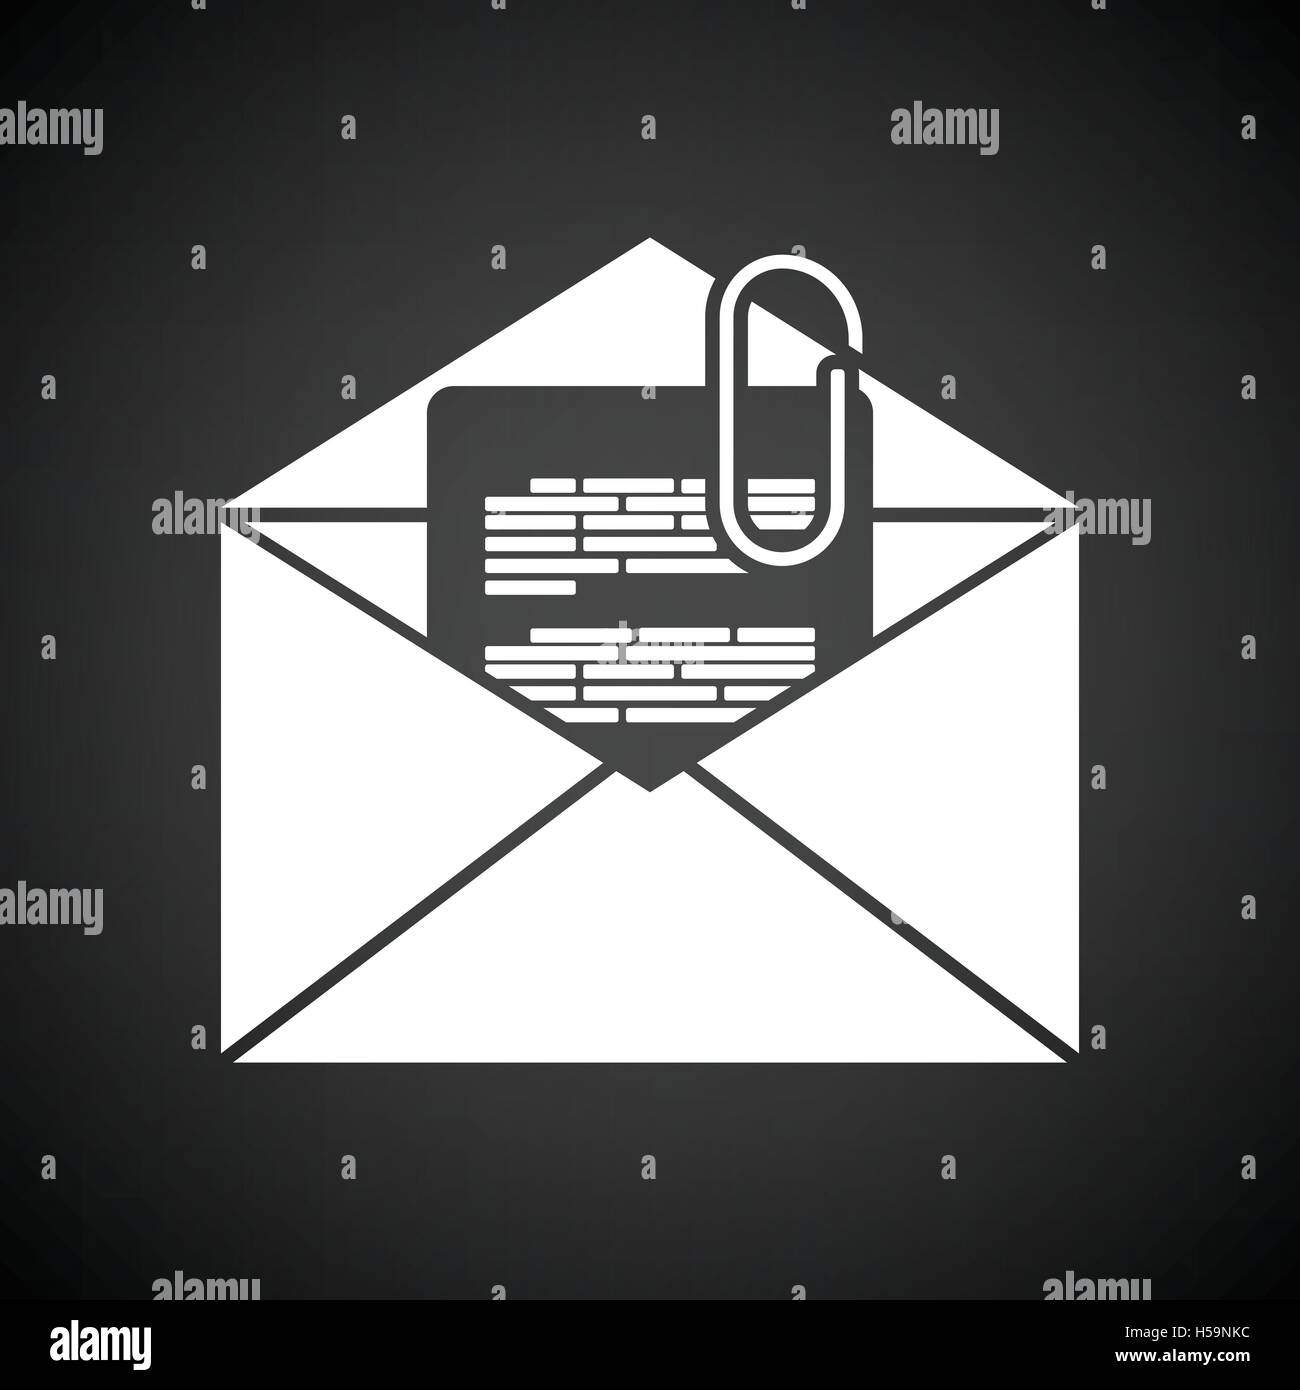 Mail with attachment icon. Black background with white. Vector illustration. Stock Vector